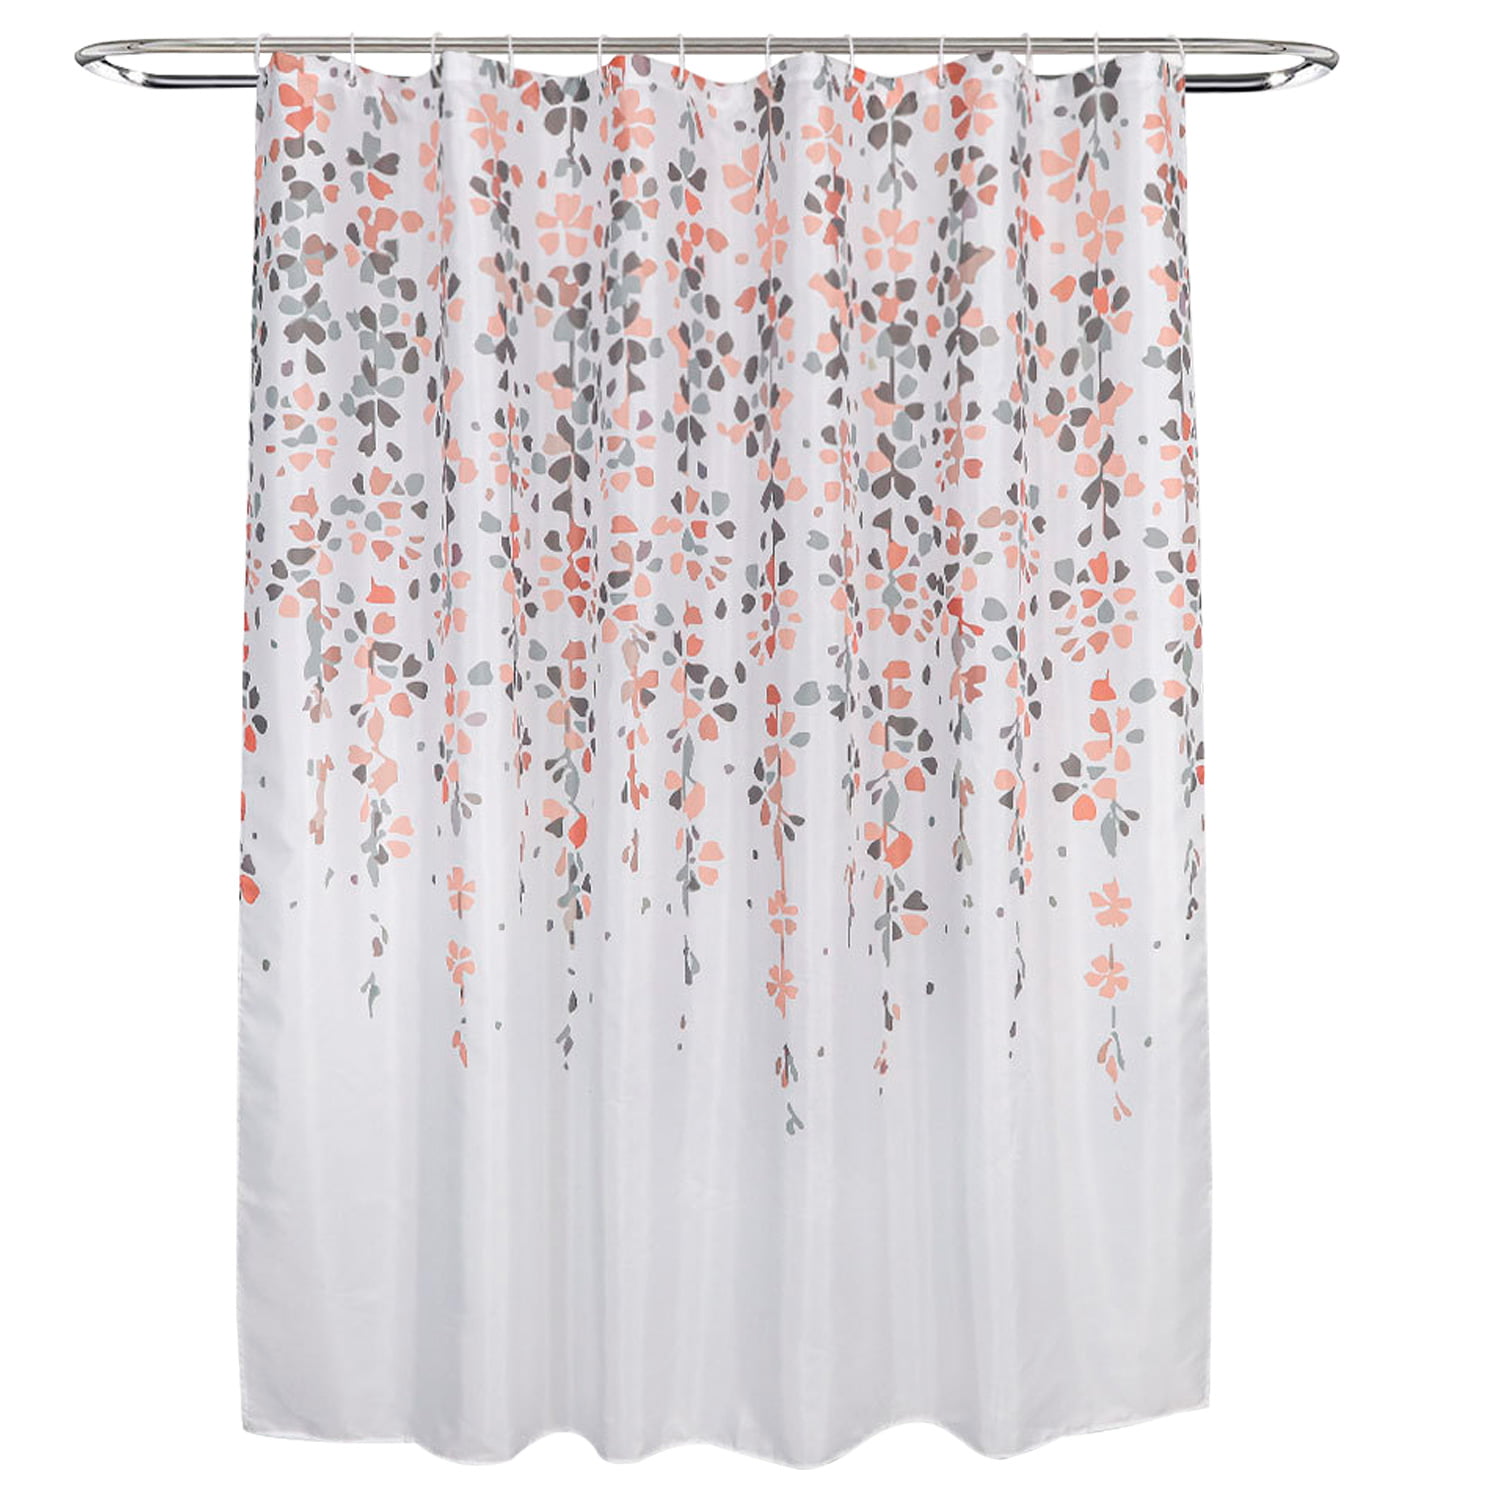 Shower Curtain For Bathroom Polyester, Fabric Shower Curtain No Liner Needed